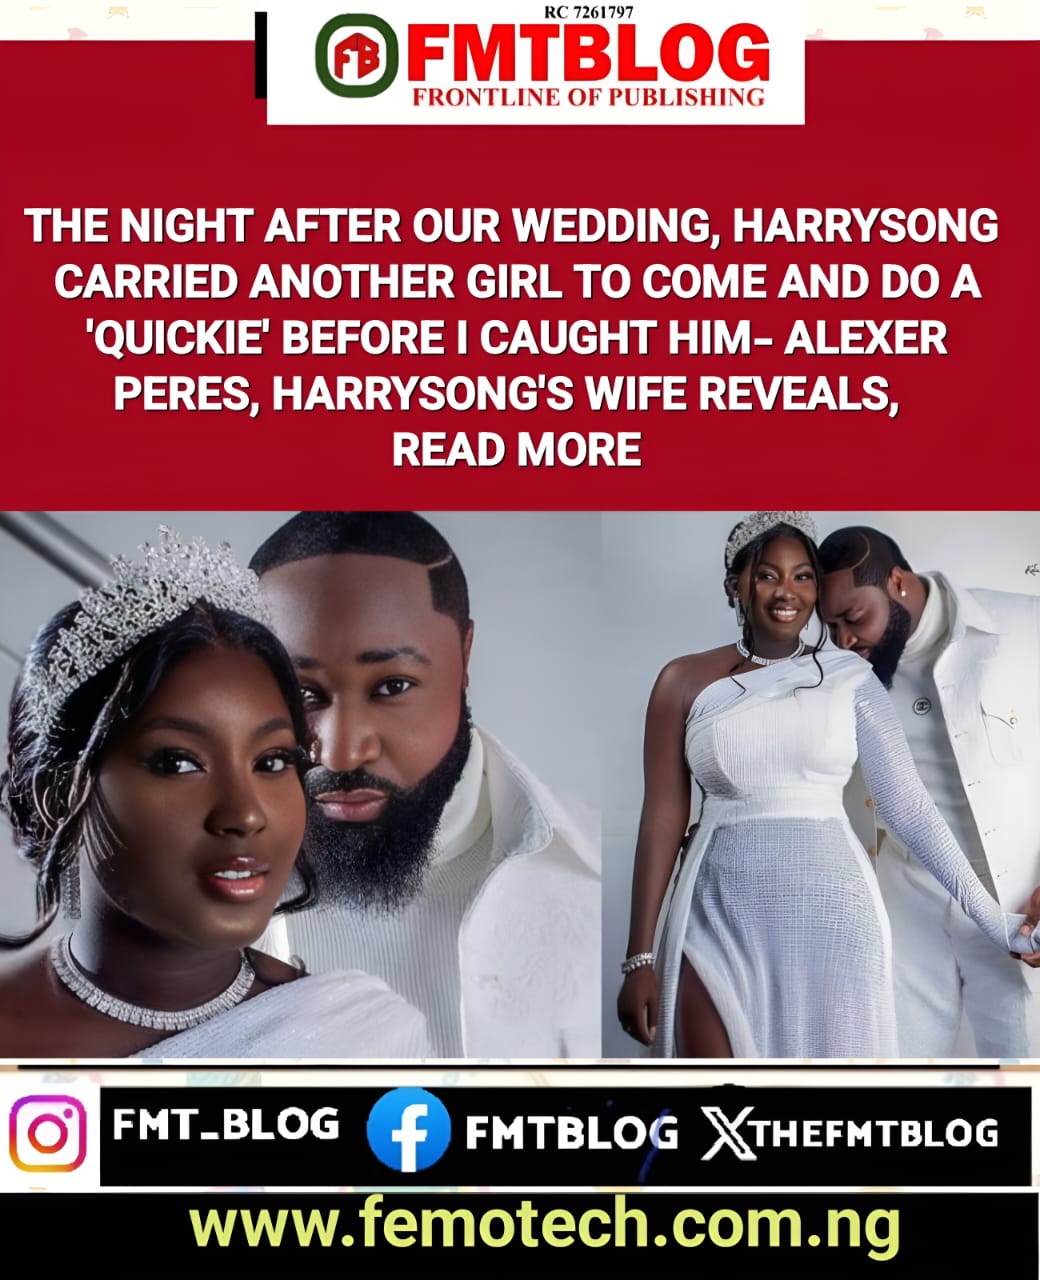 The Night After Our Wedding, Harrysong Carried Another Girl To Come And Do A ‘Quickie’ Before I Caught Him-Alexer Peres, Harrysong’s Wife Reveals (VIDEO)